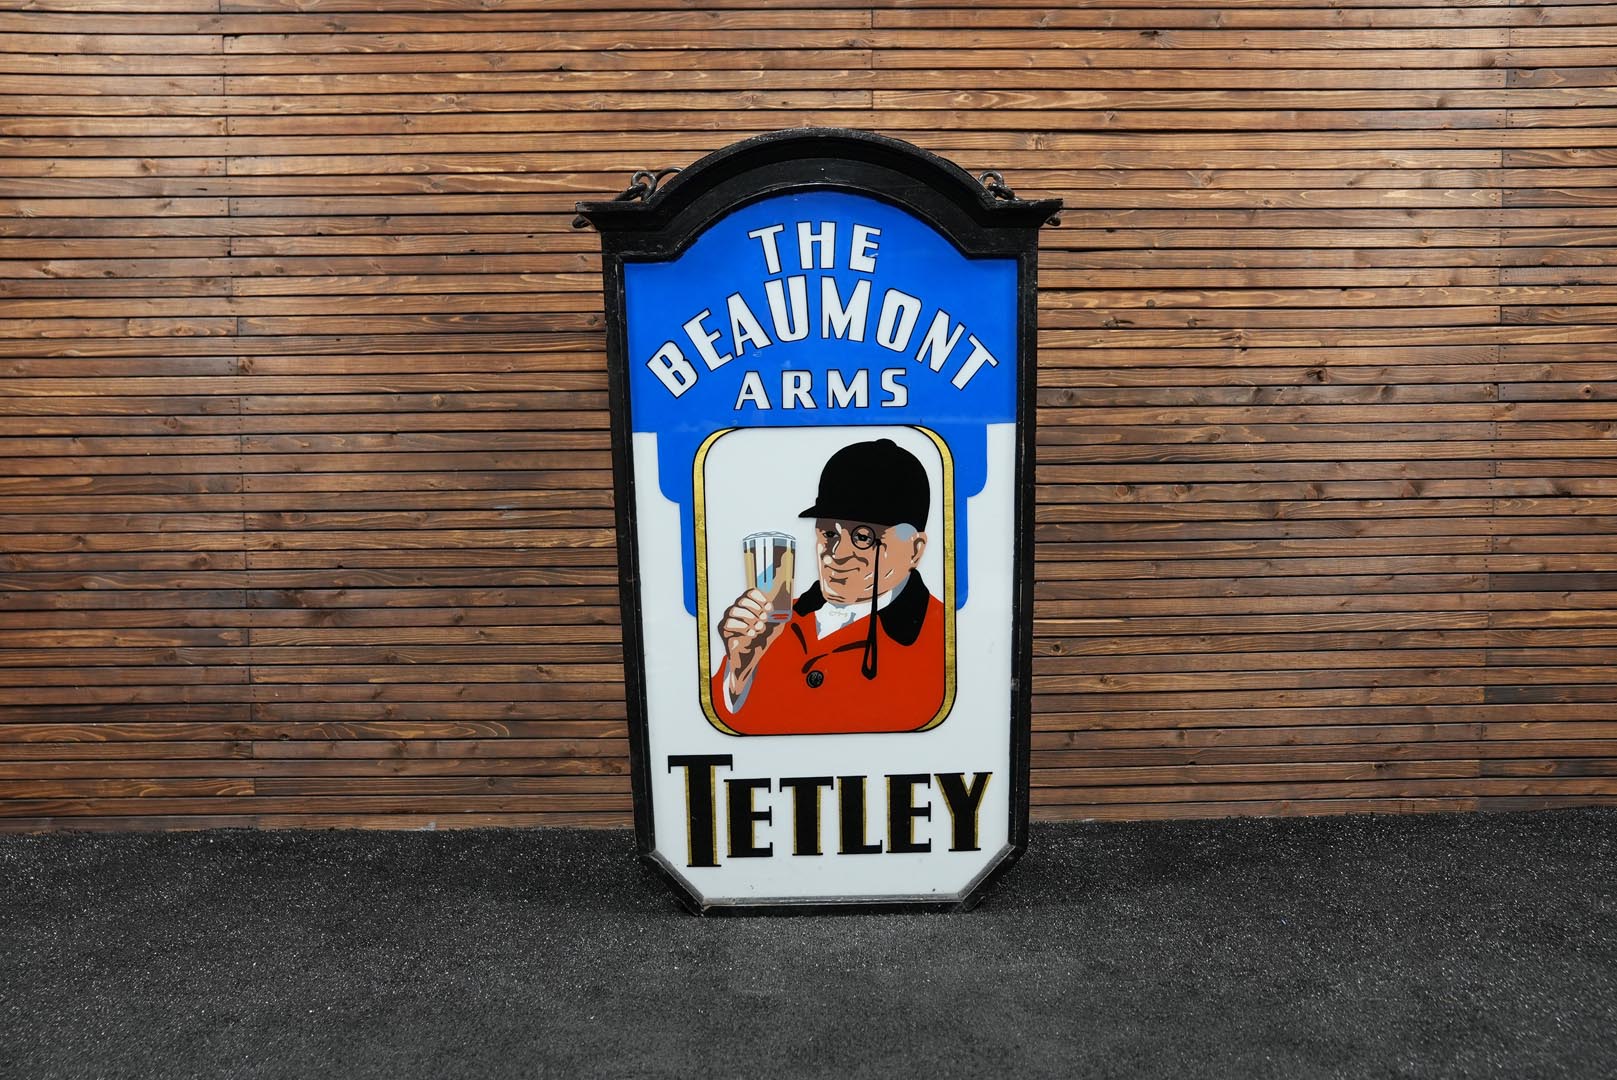  Tetley Ales-Beaumont Arms Larg e Lighted Sign 